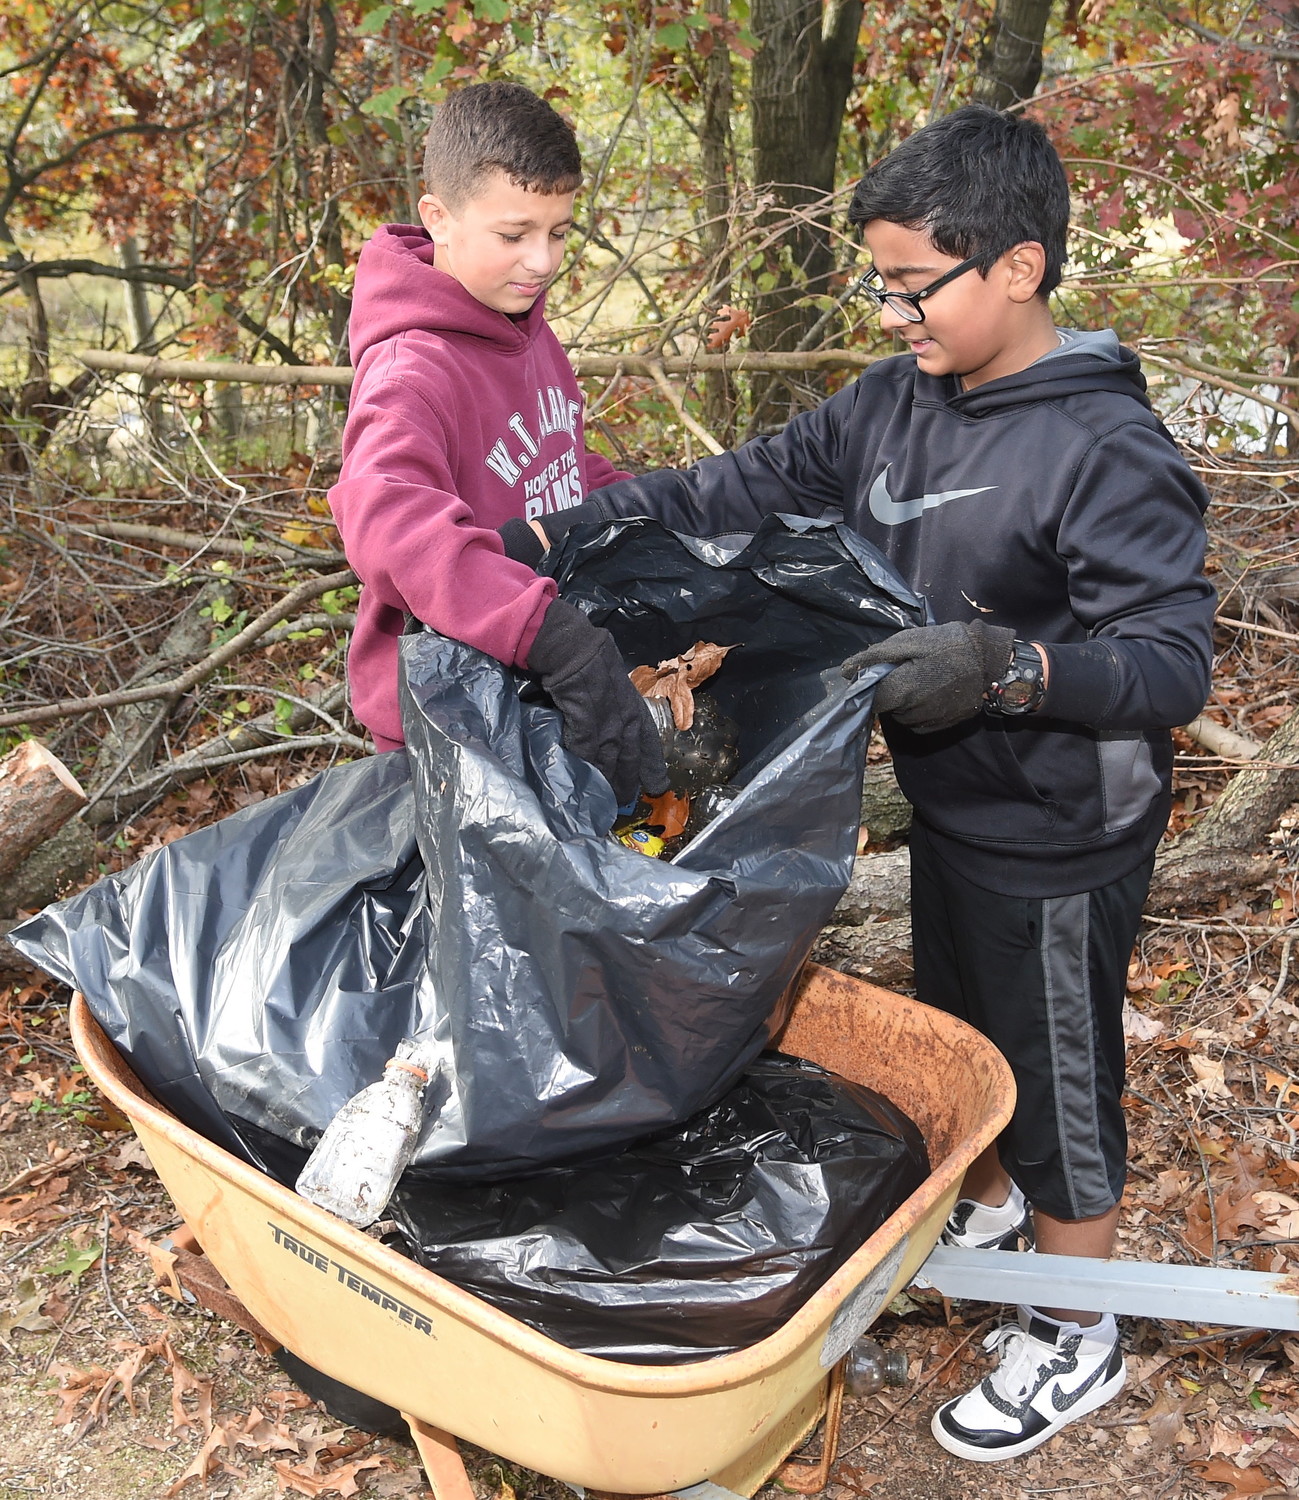 Antonio Palmeri and Sidd Chiguripati used a wheelbarrow to stuff garbage bags to the brim with as much litter as possible.